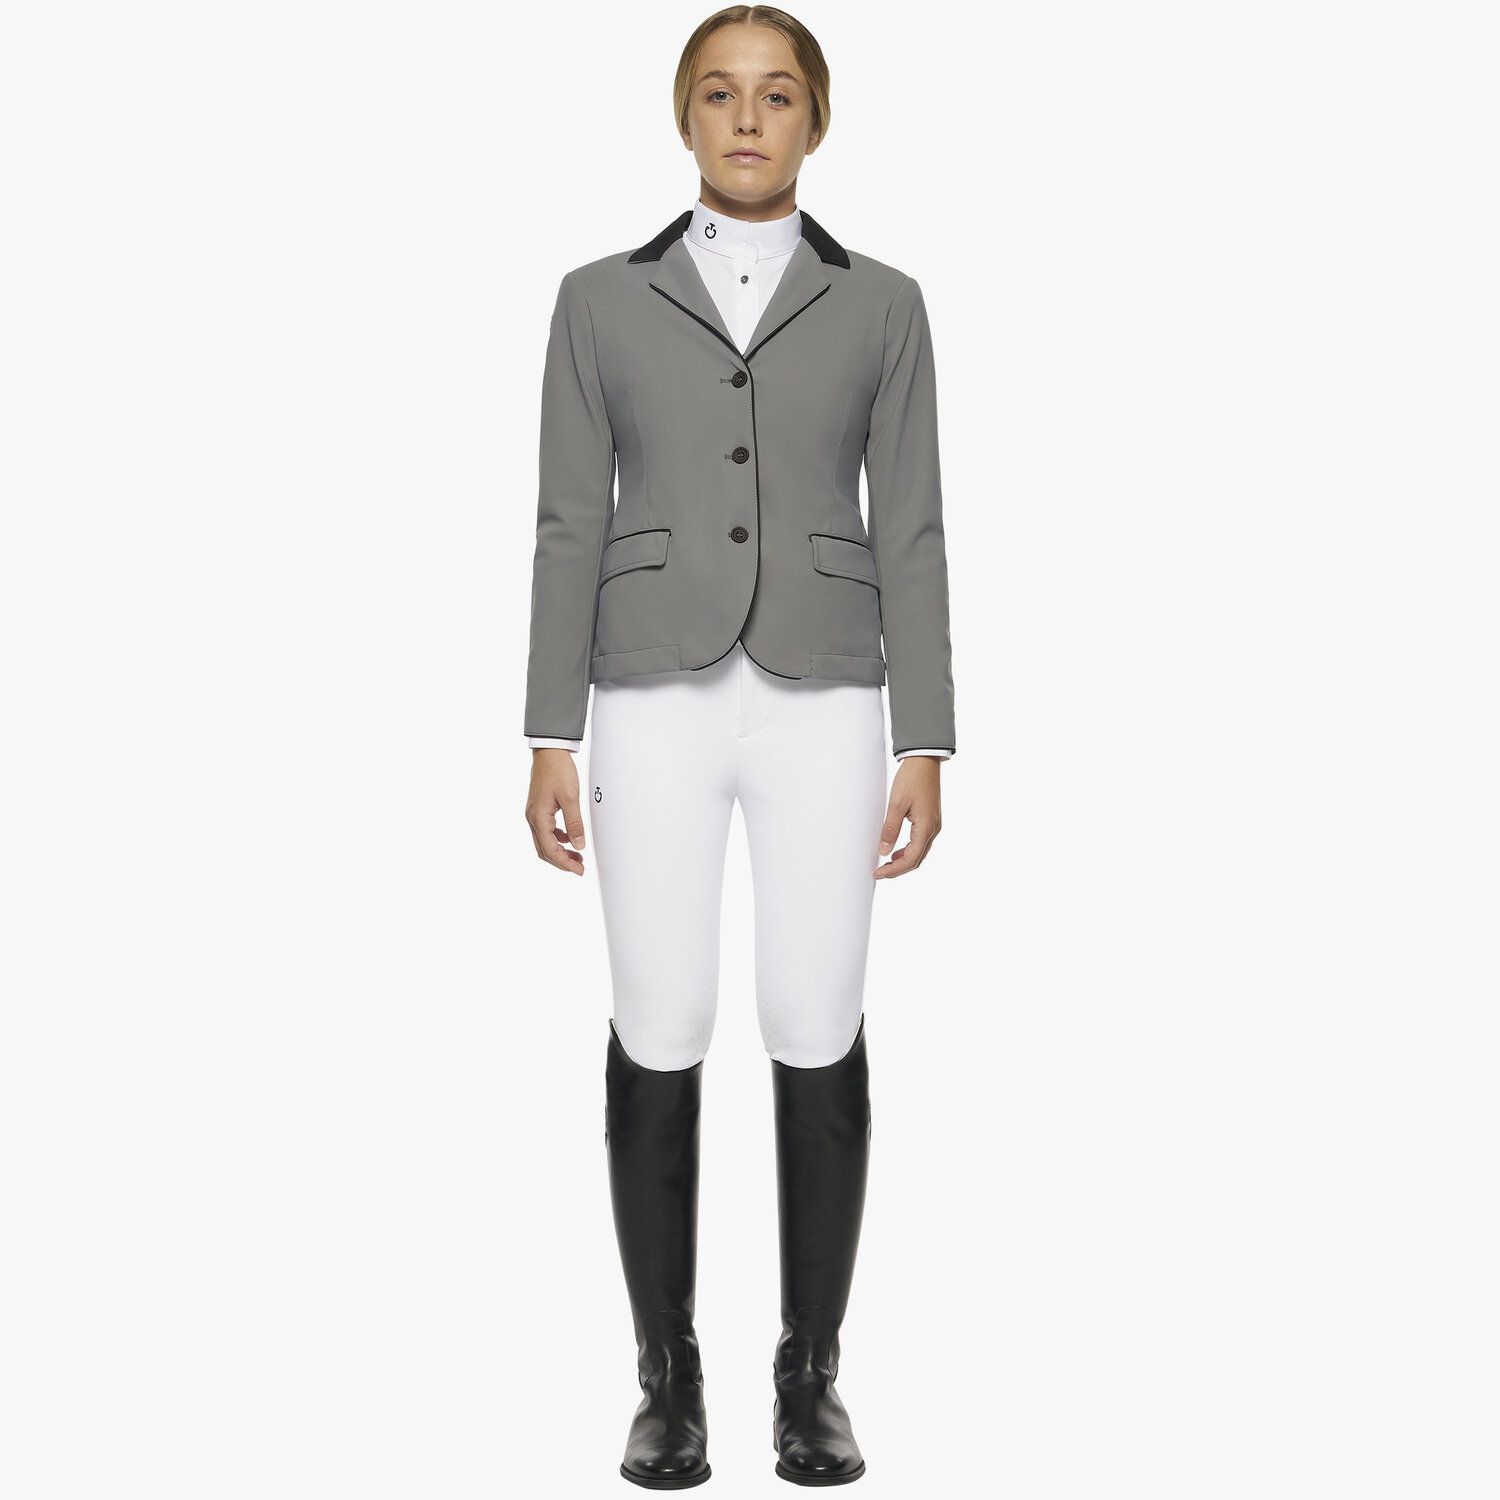 Cavalleria Toscana Girl's competition riding jacket. GREY-2